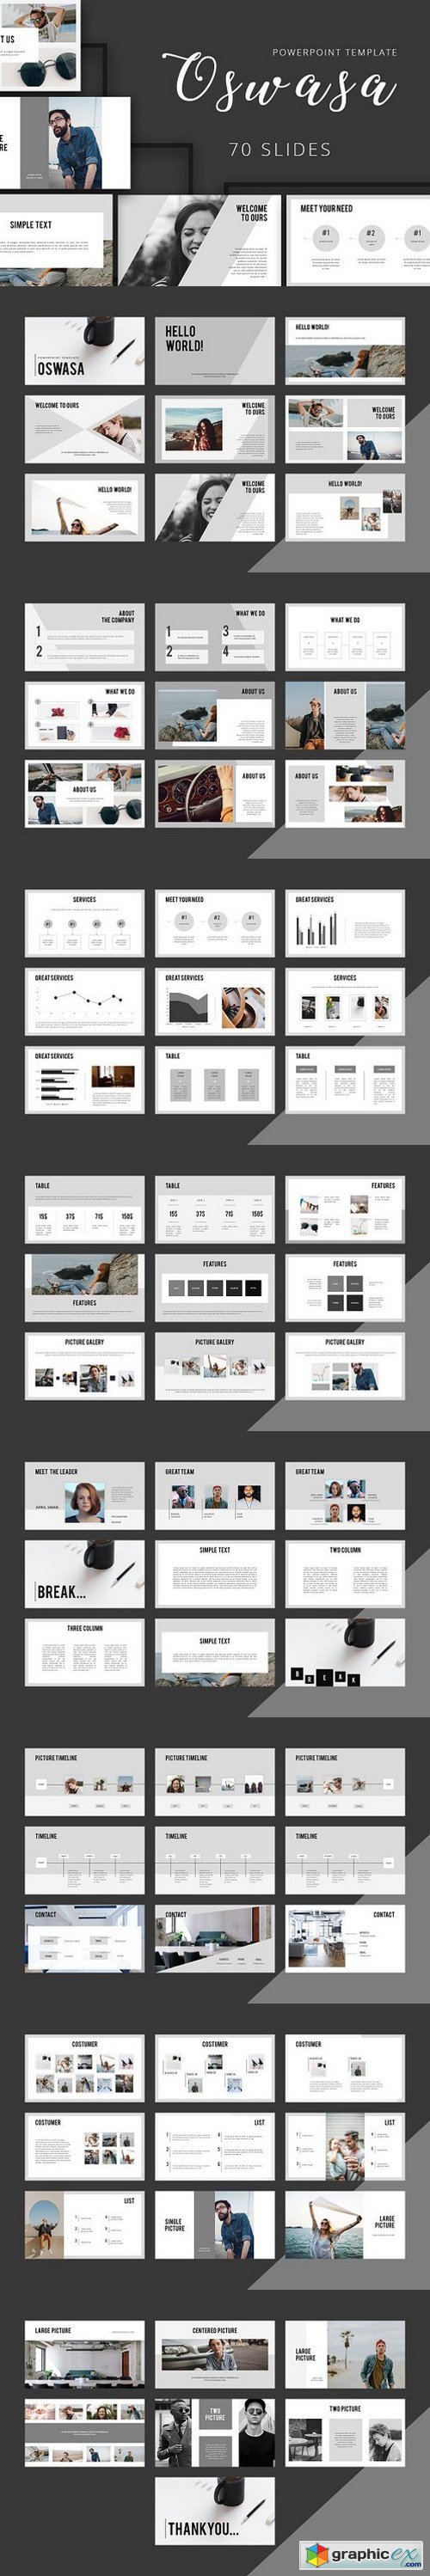 OSWASA Powerpoint Template